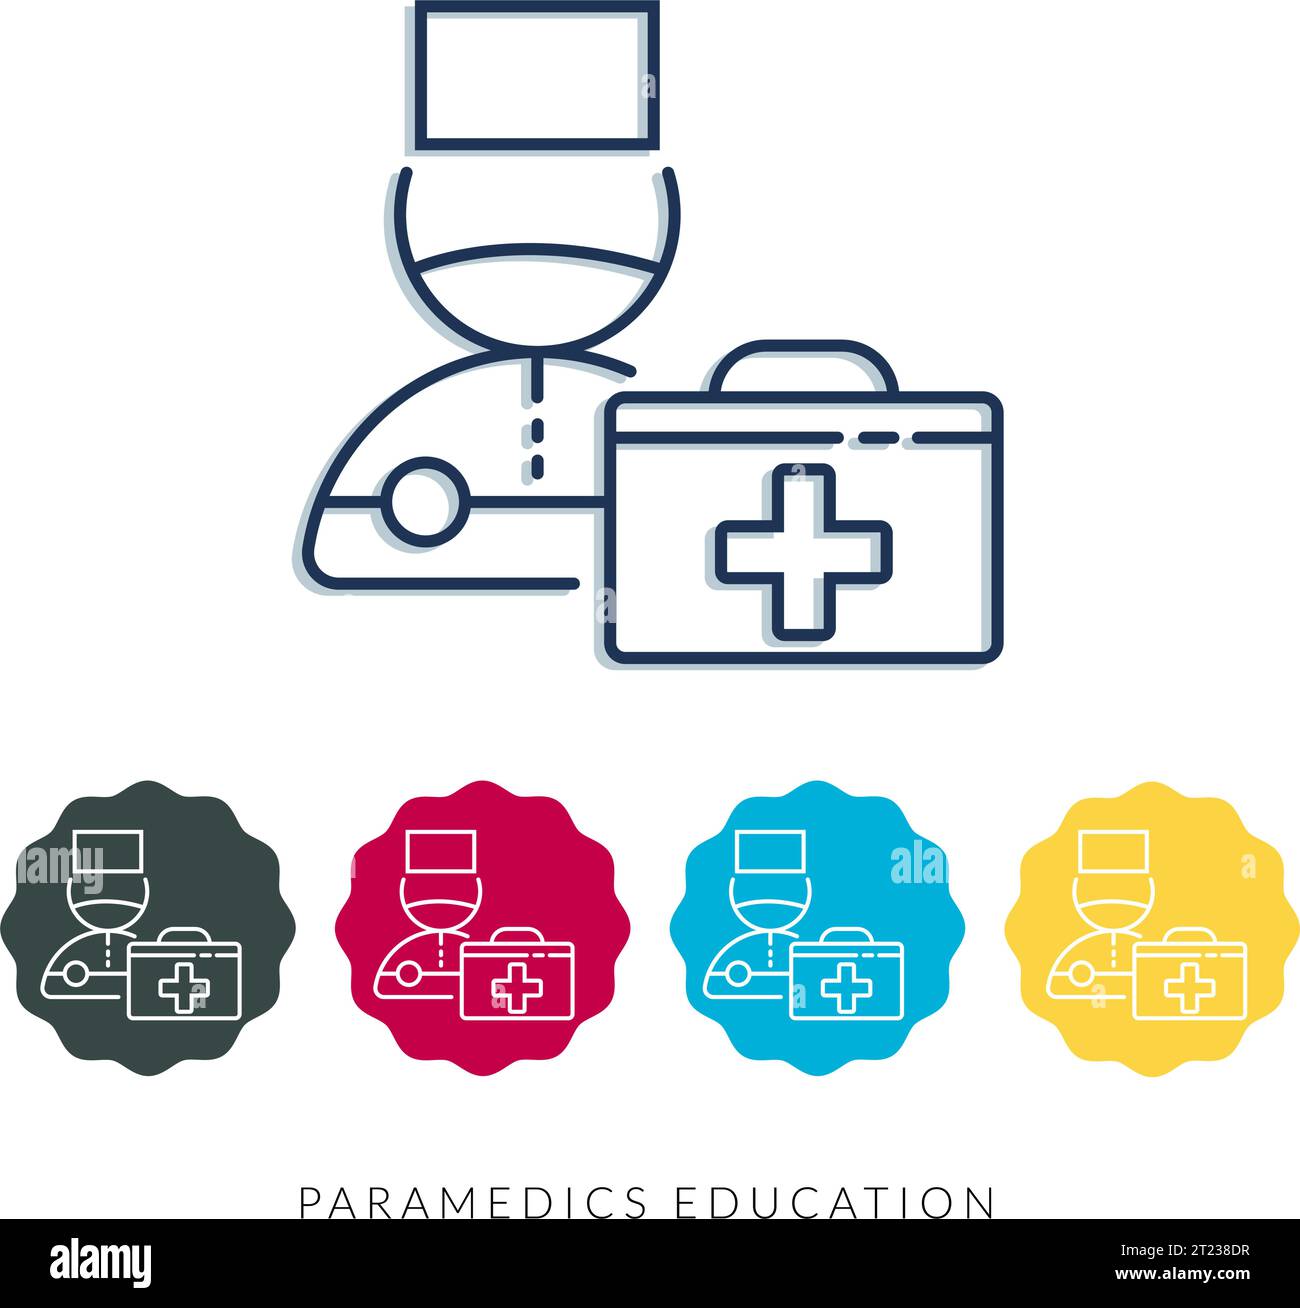 Paramedic Education Courses - Stock Icon as EPS 10 File Stock Vector